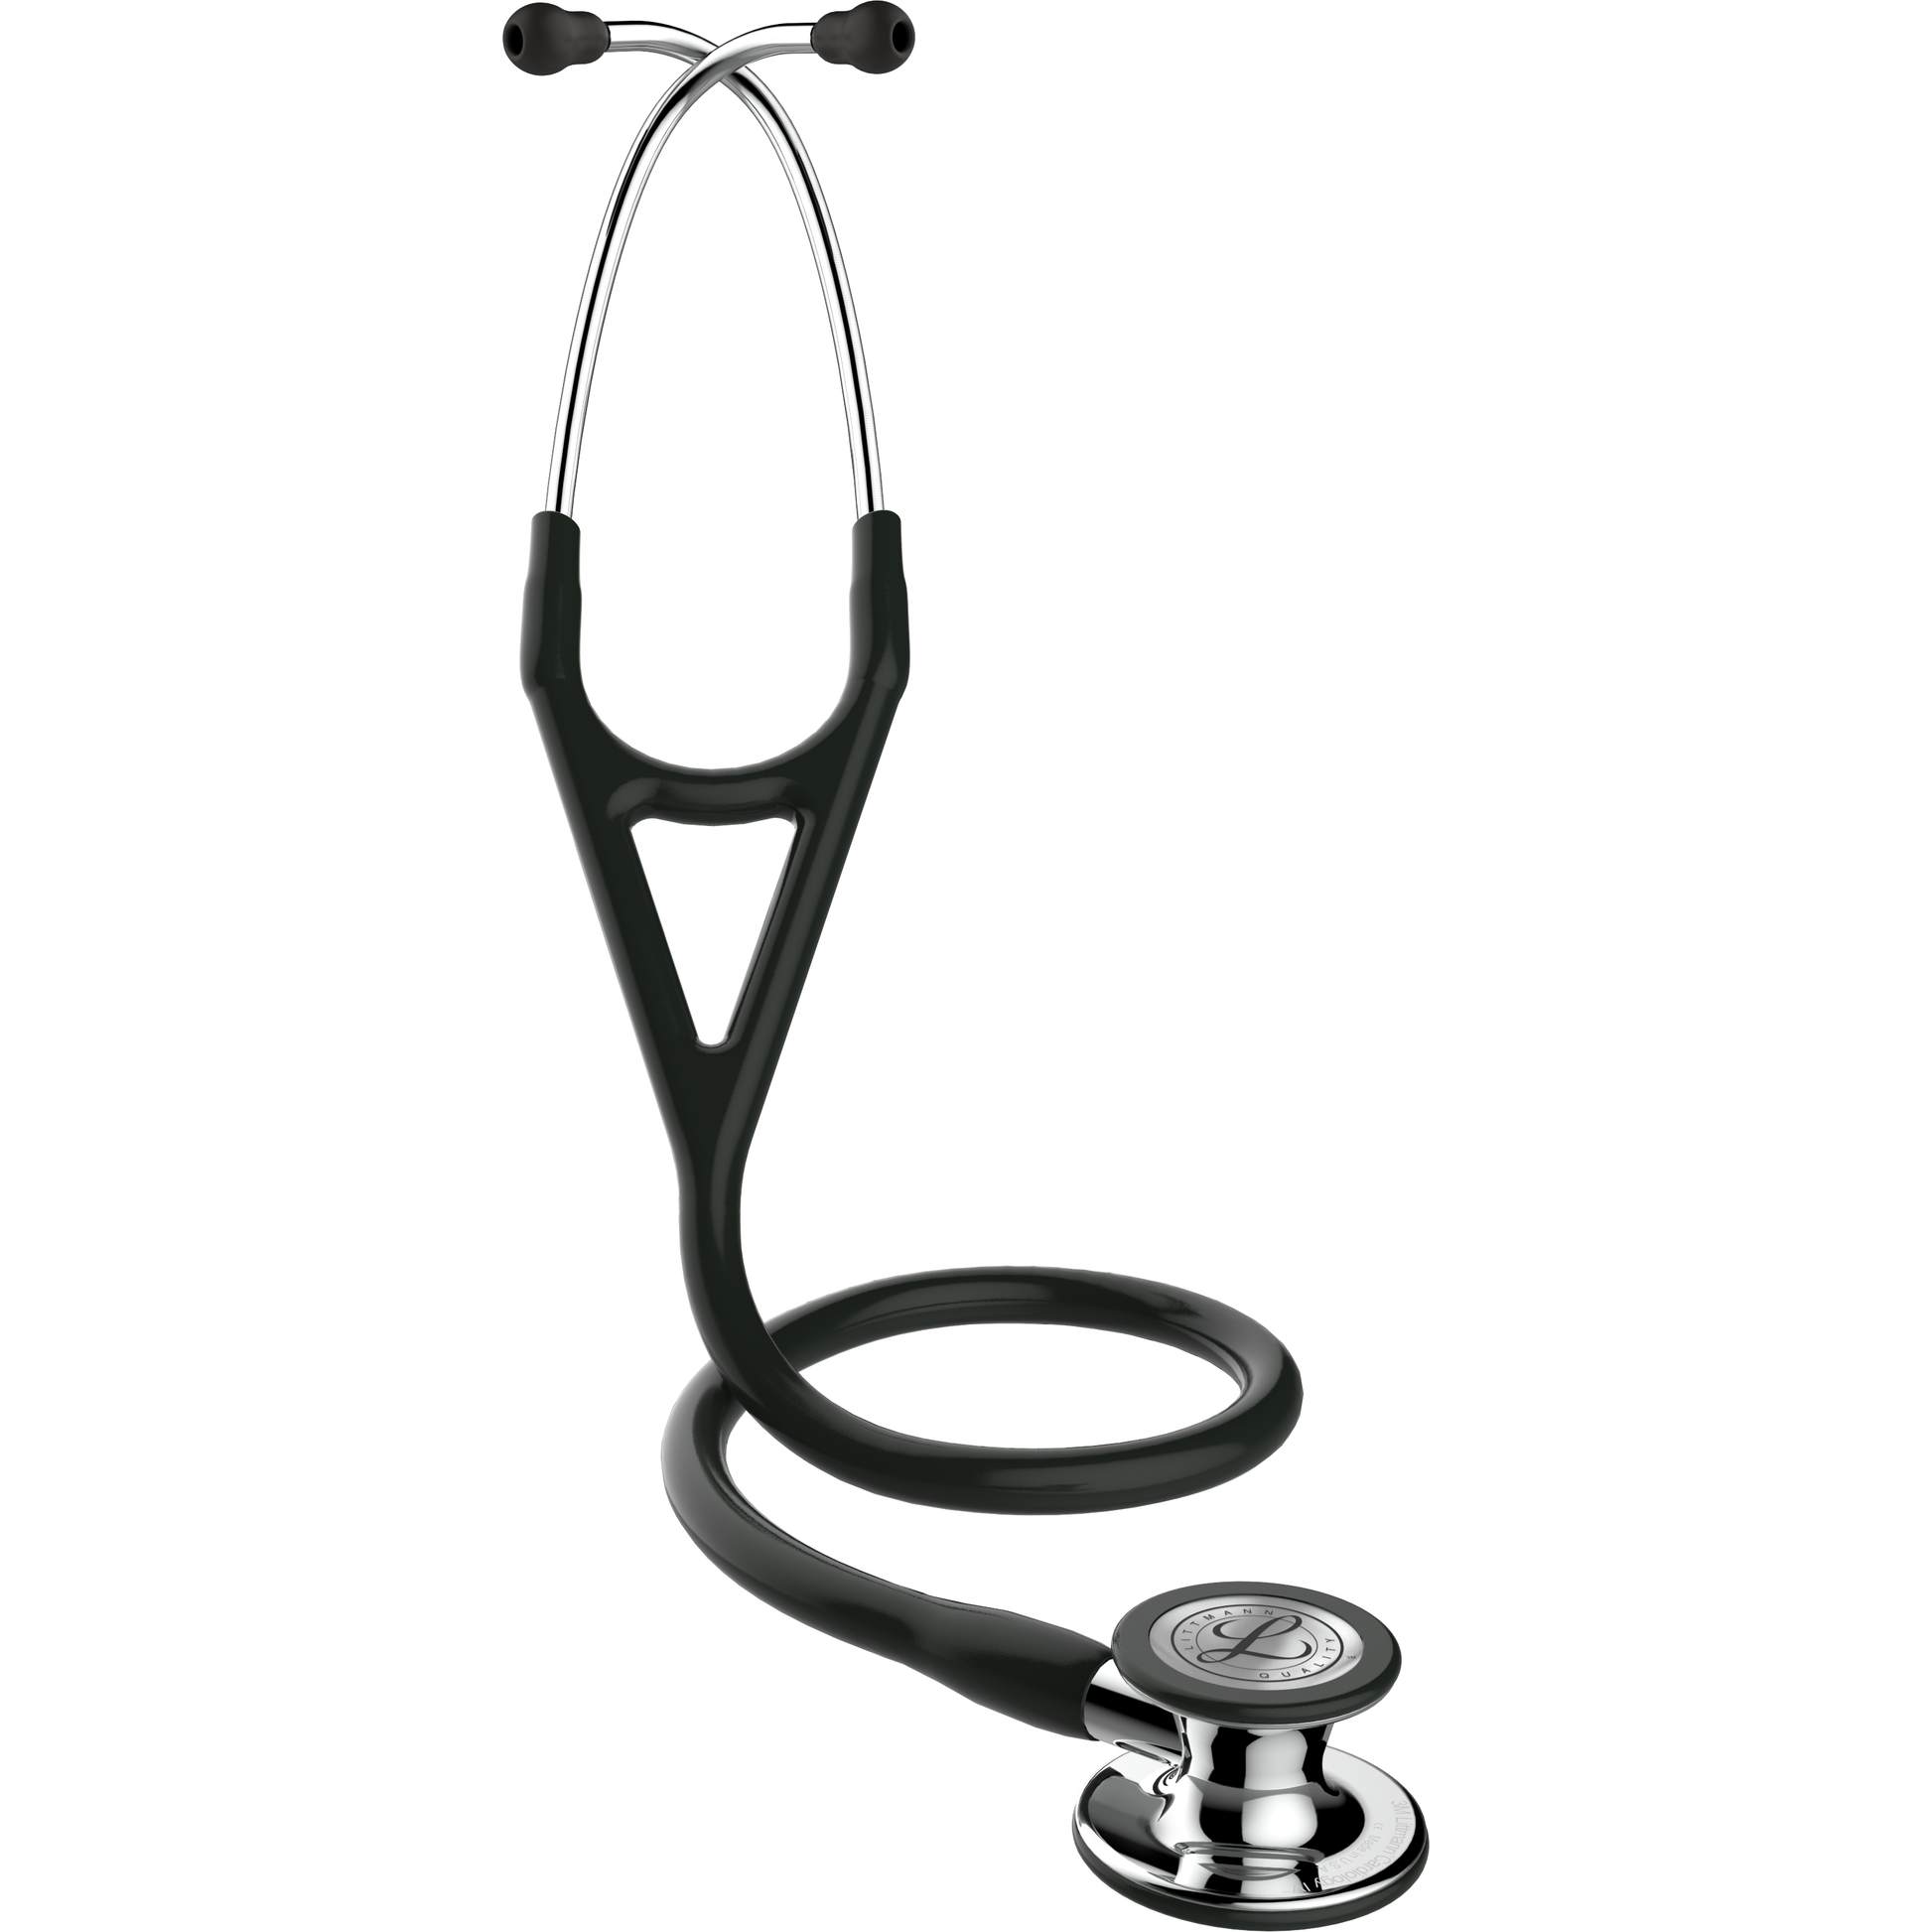 Littmann Cardiology IV 6163 stethoscope with name engraving and